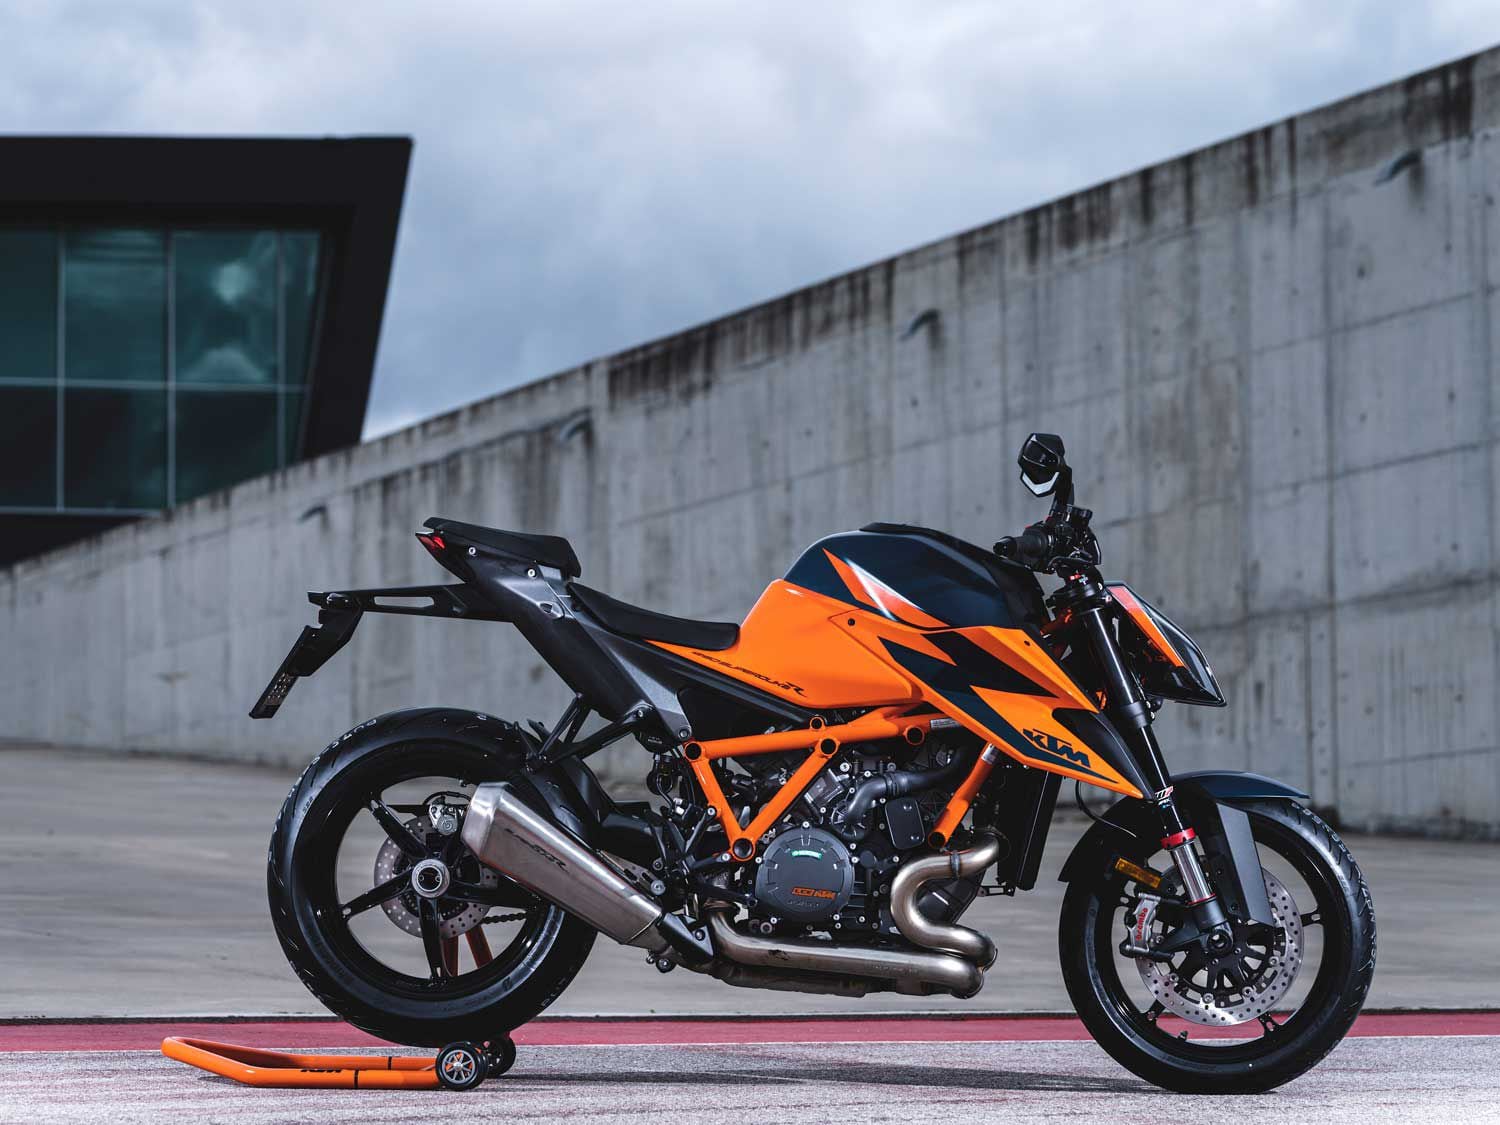 Leaner, meaner, and more apt to play. KTM’s 1290 Super Duke R is a gigantic step forward as compared to its last major update in 2017.